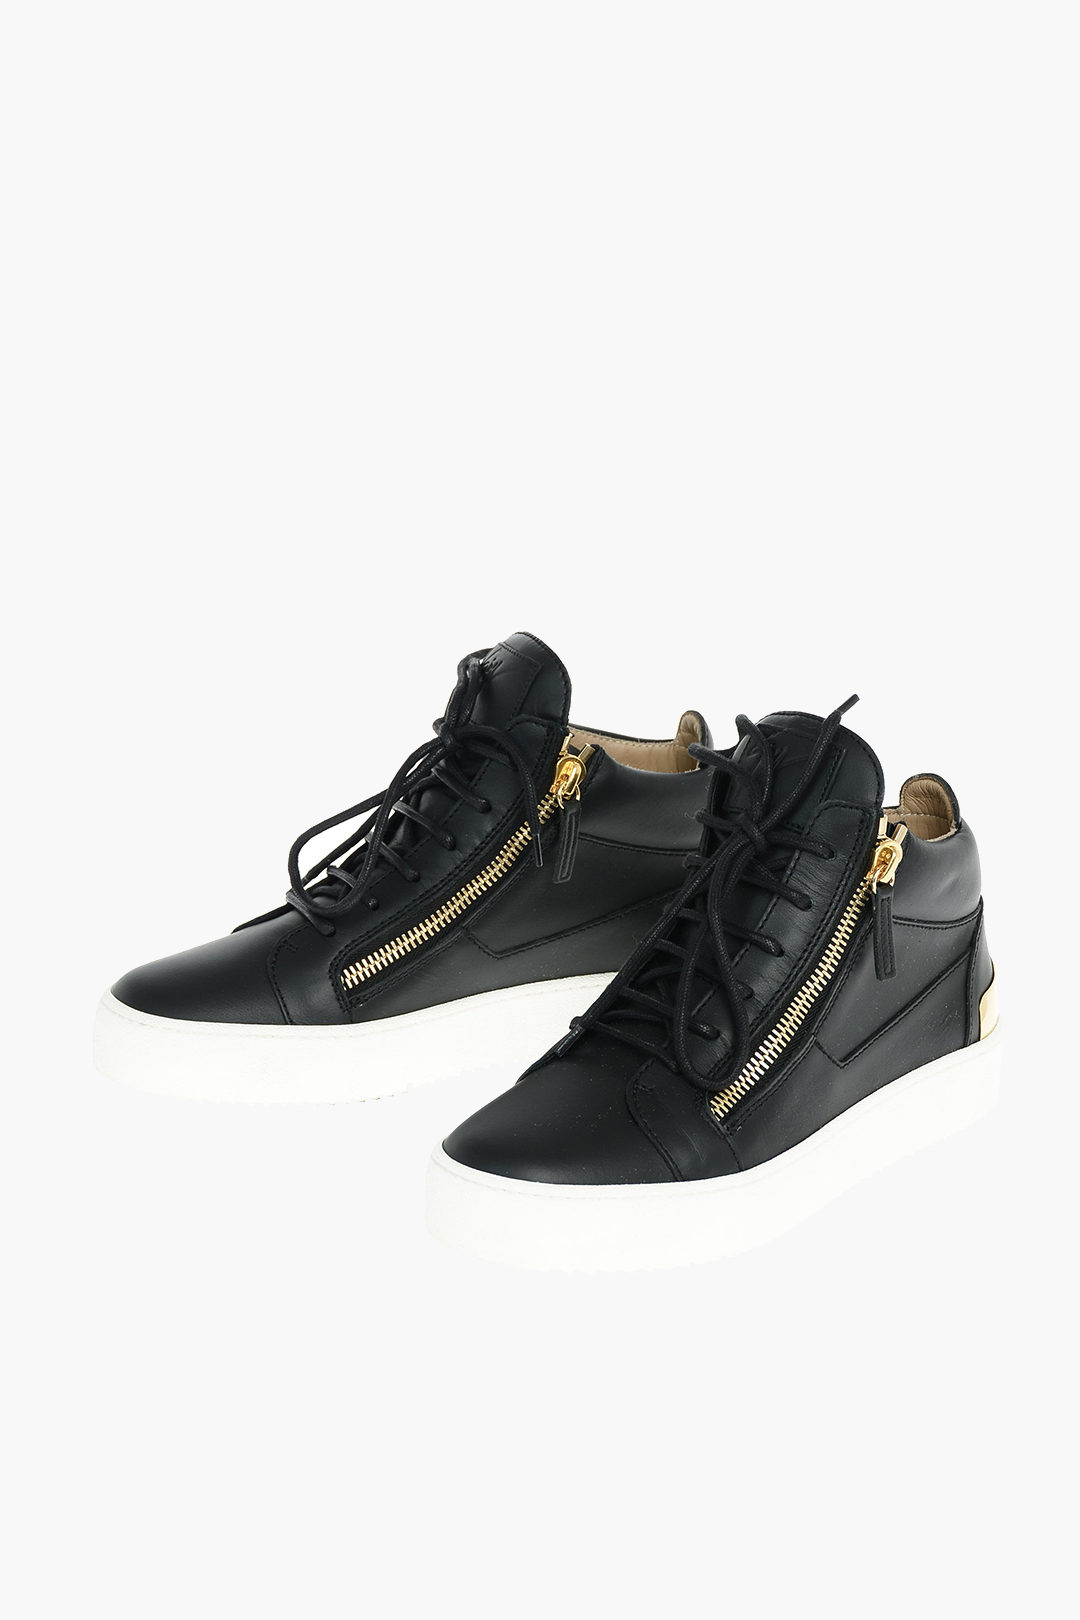 Handschrift Kwestie taxi Giuseppe Zanotti Lace-up Zipped MAY LOND Leather High Sneakers men -  Glamood Outlet